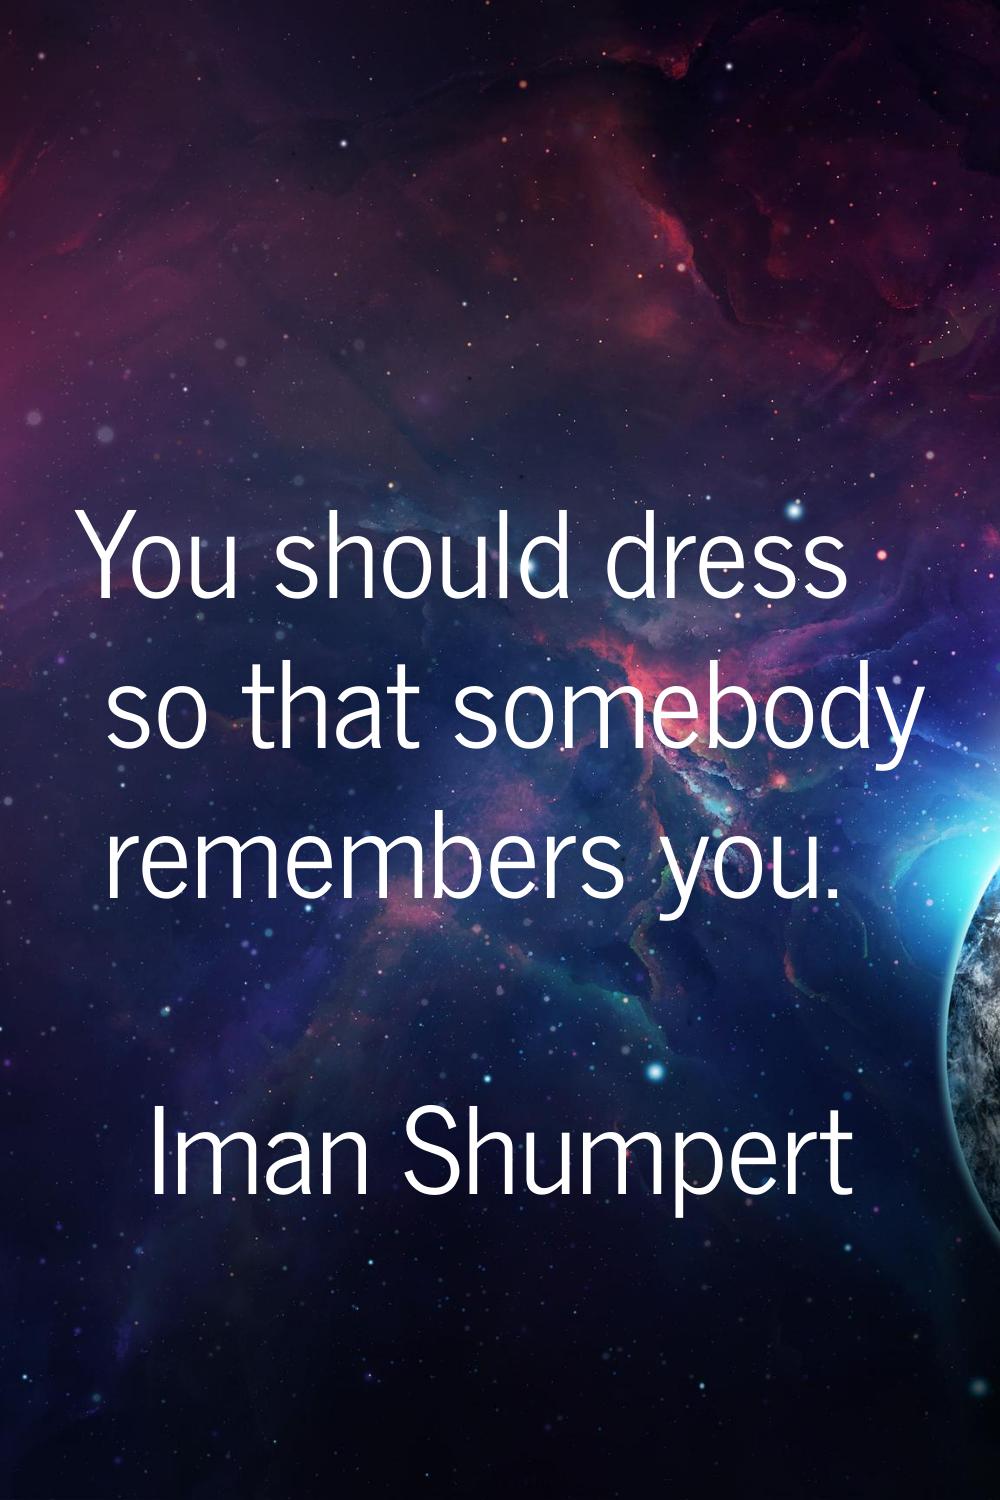 You should dress so that somebody remembers you.